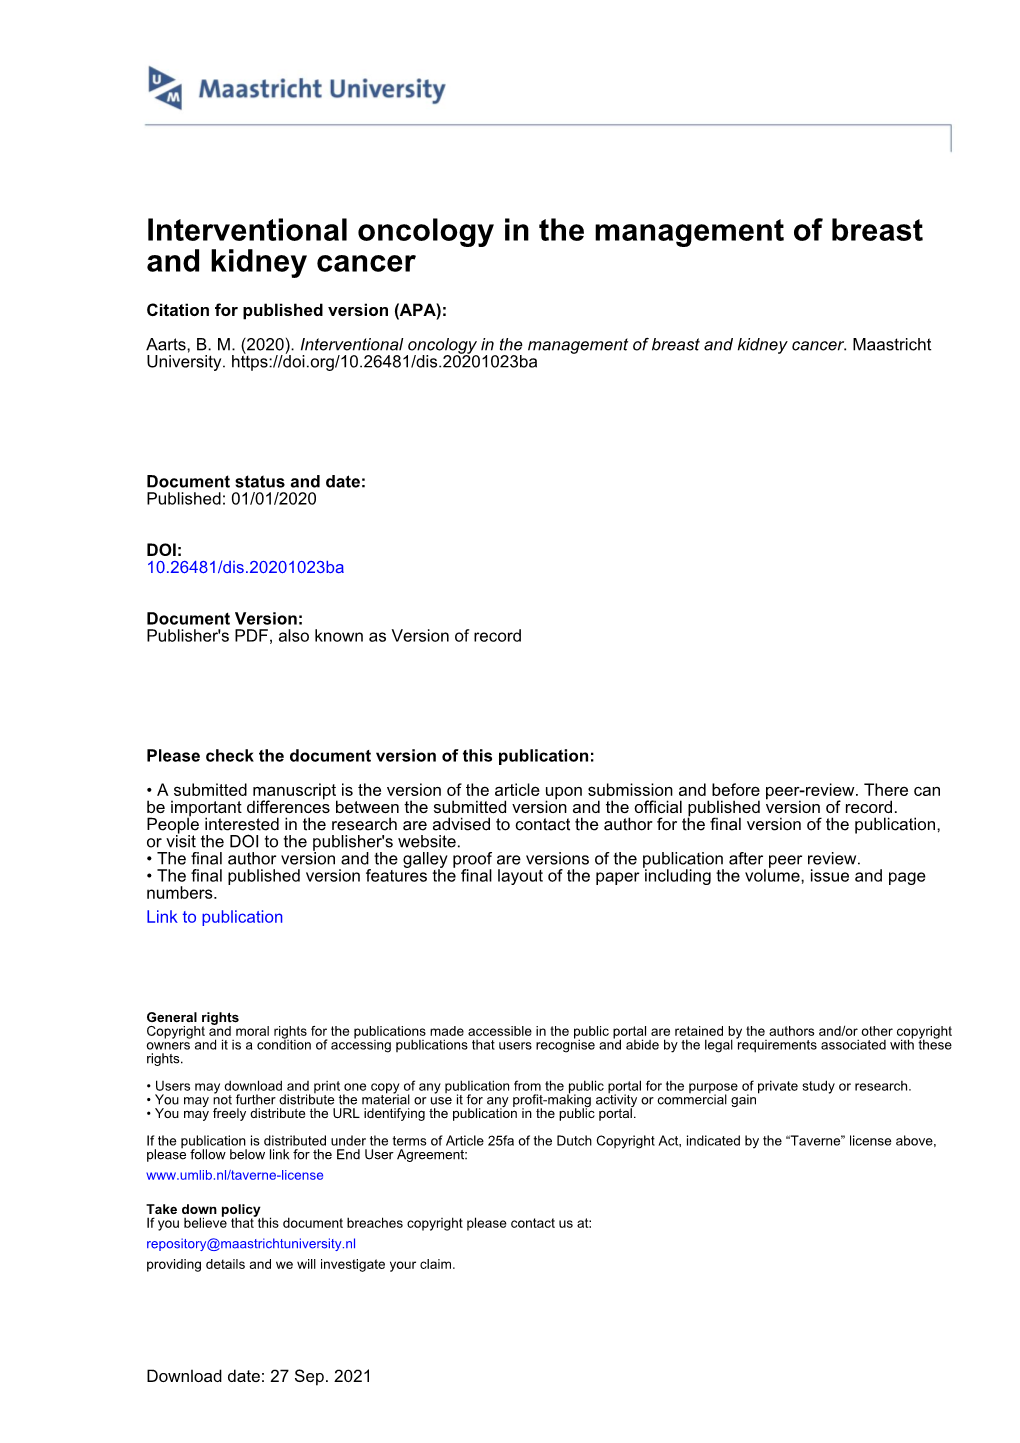 Interventional Oncology in the Management of Breast and Kidney Cancer